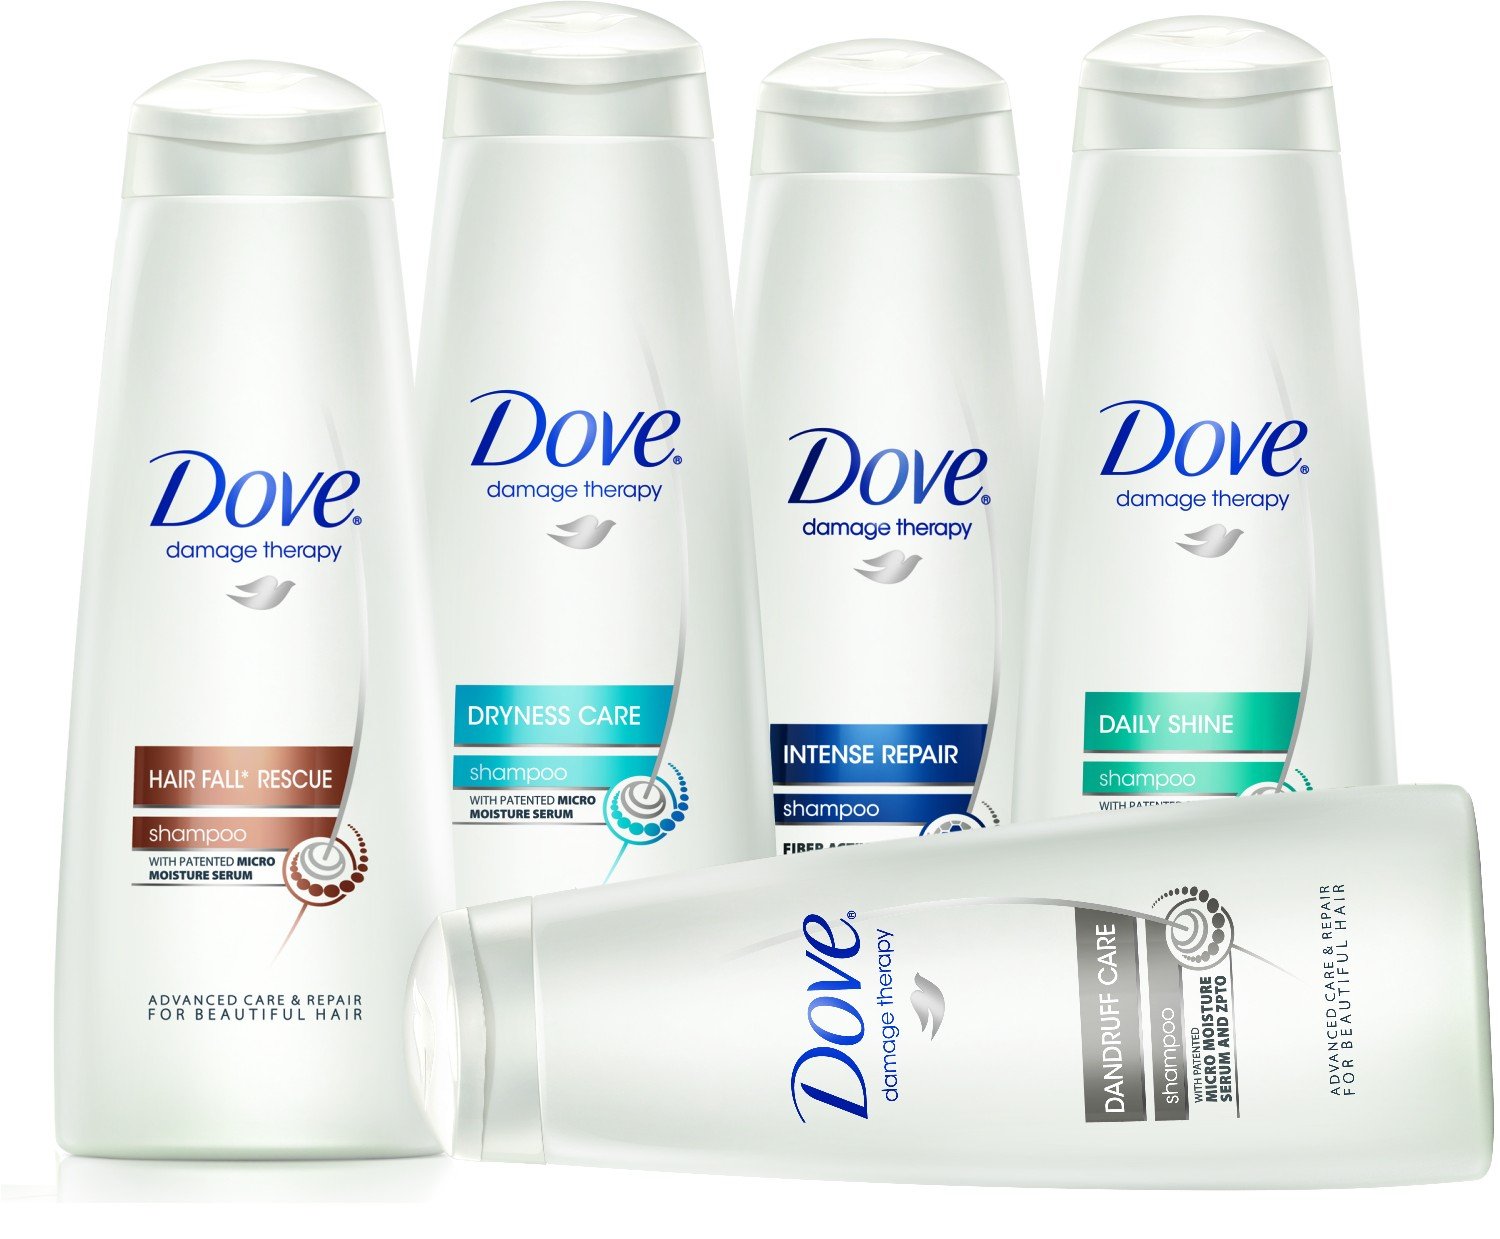 New $3.75/2 Dove Hair Care Products Coupon – Better Than FREE at